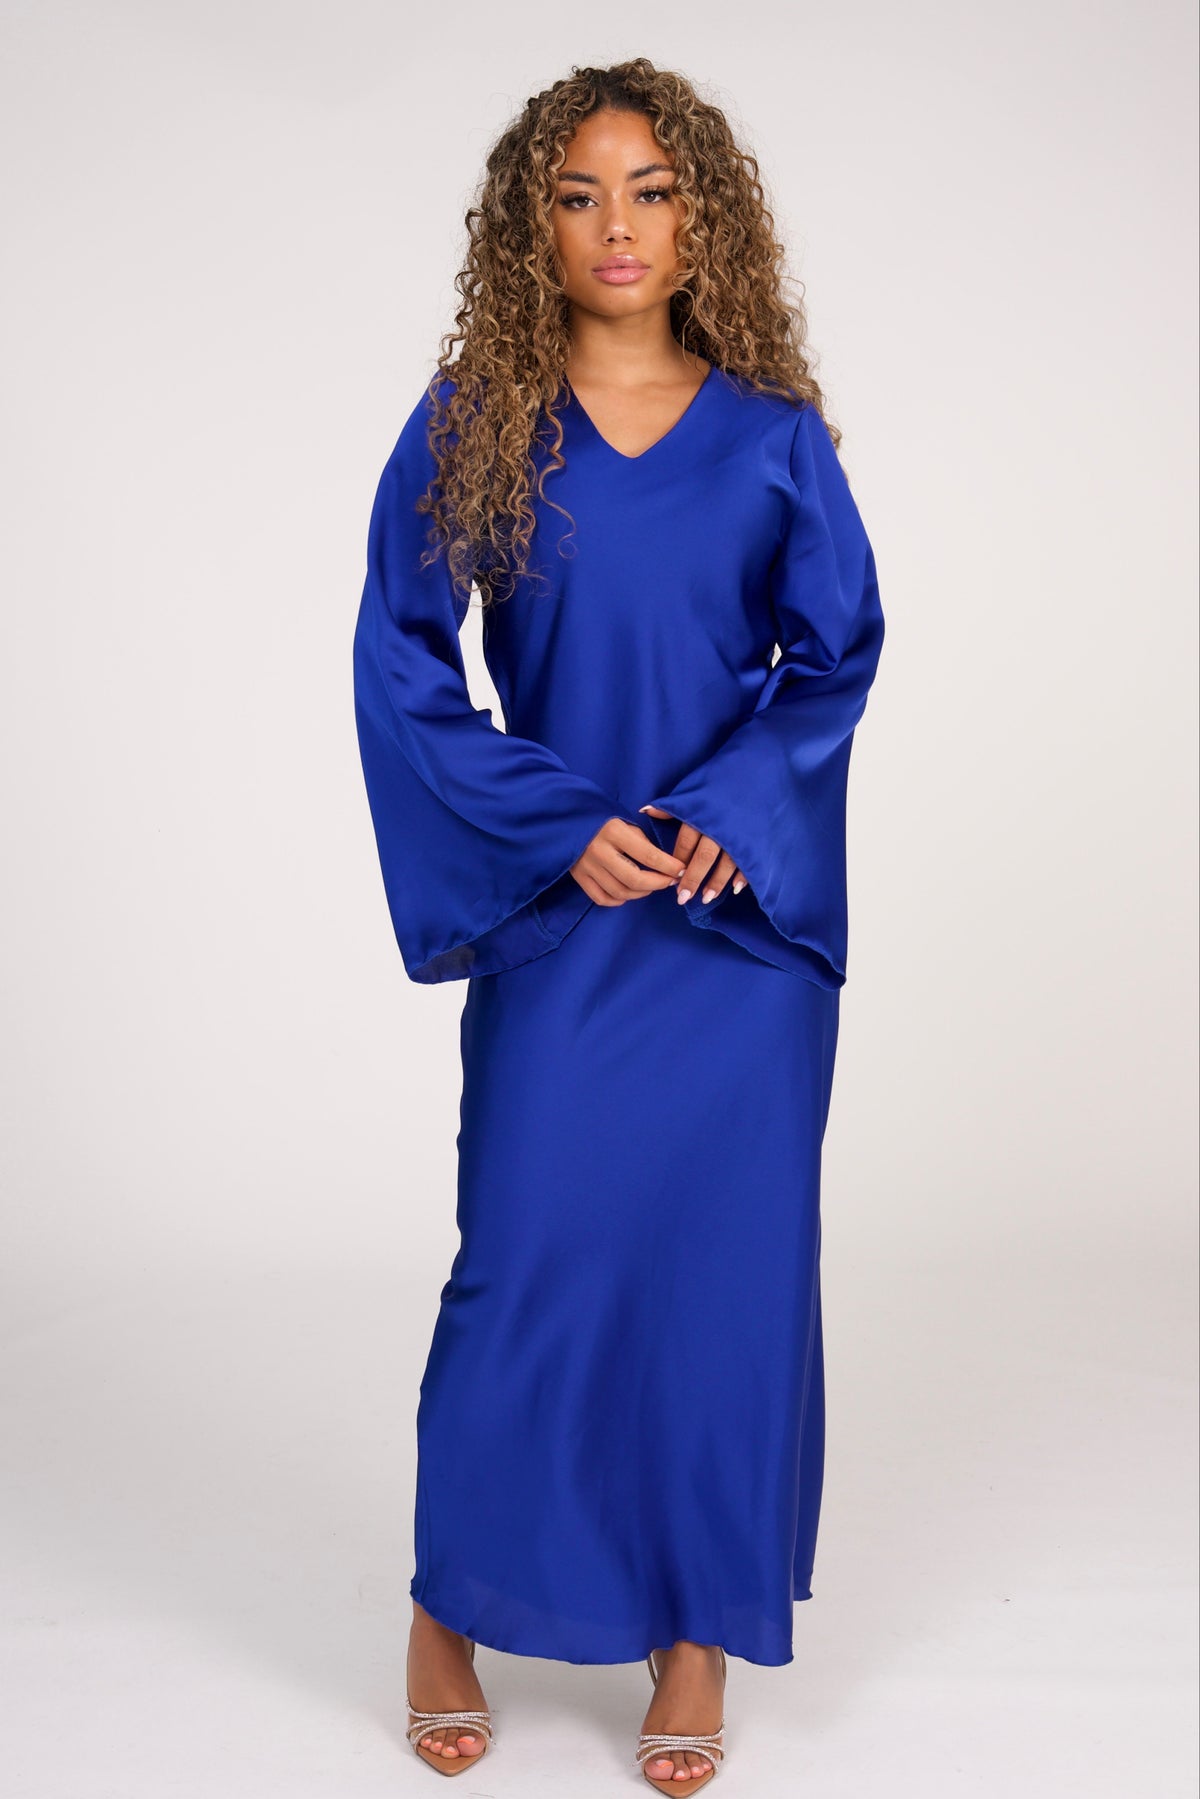 Satin Dress with Long Sleeves